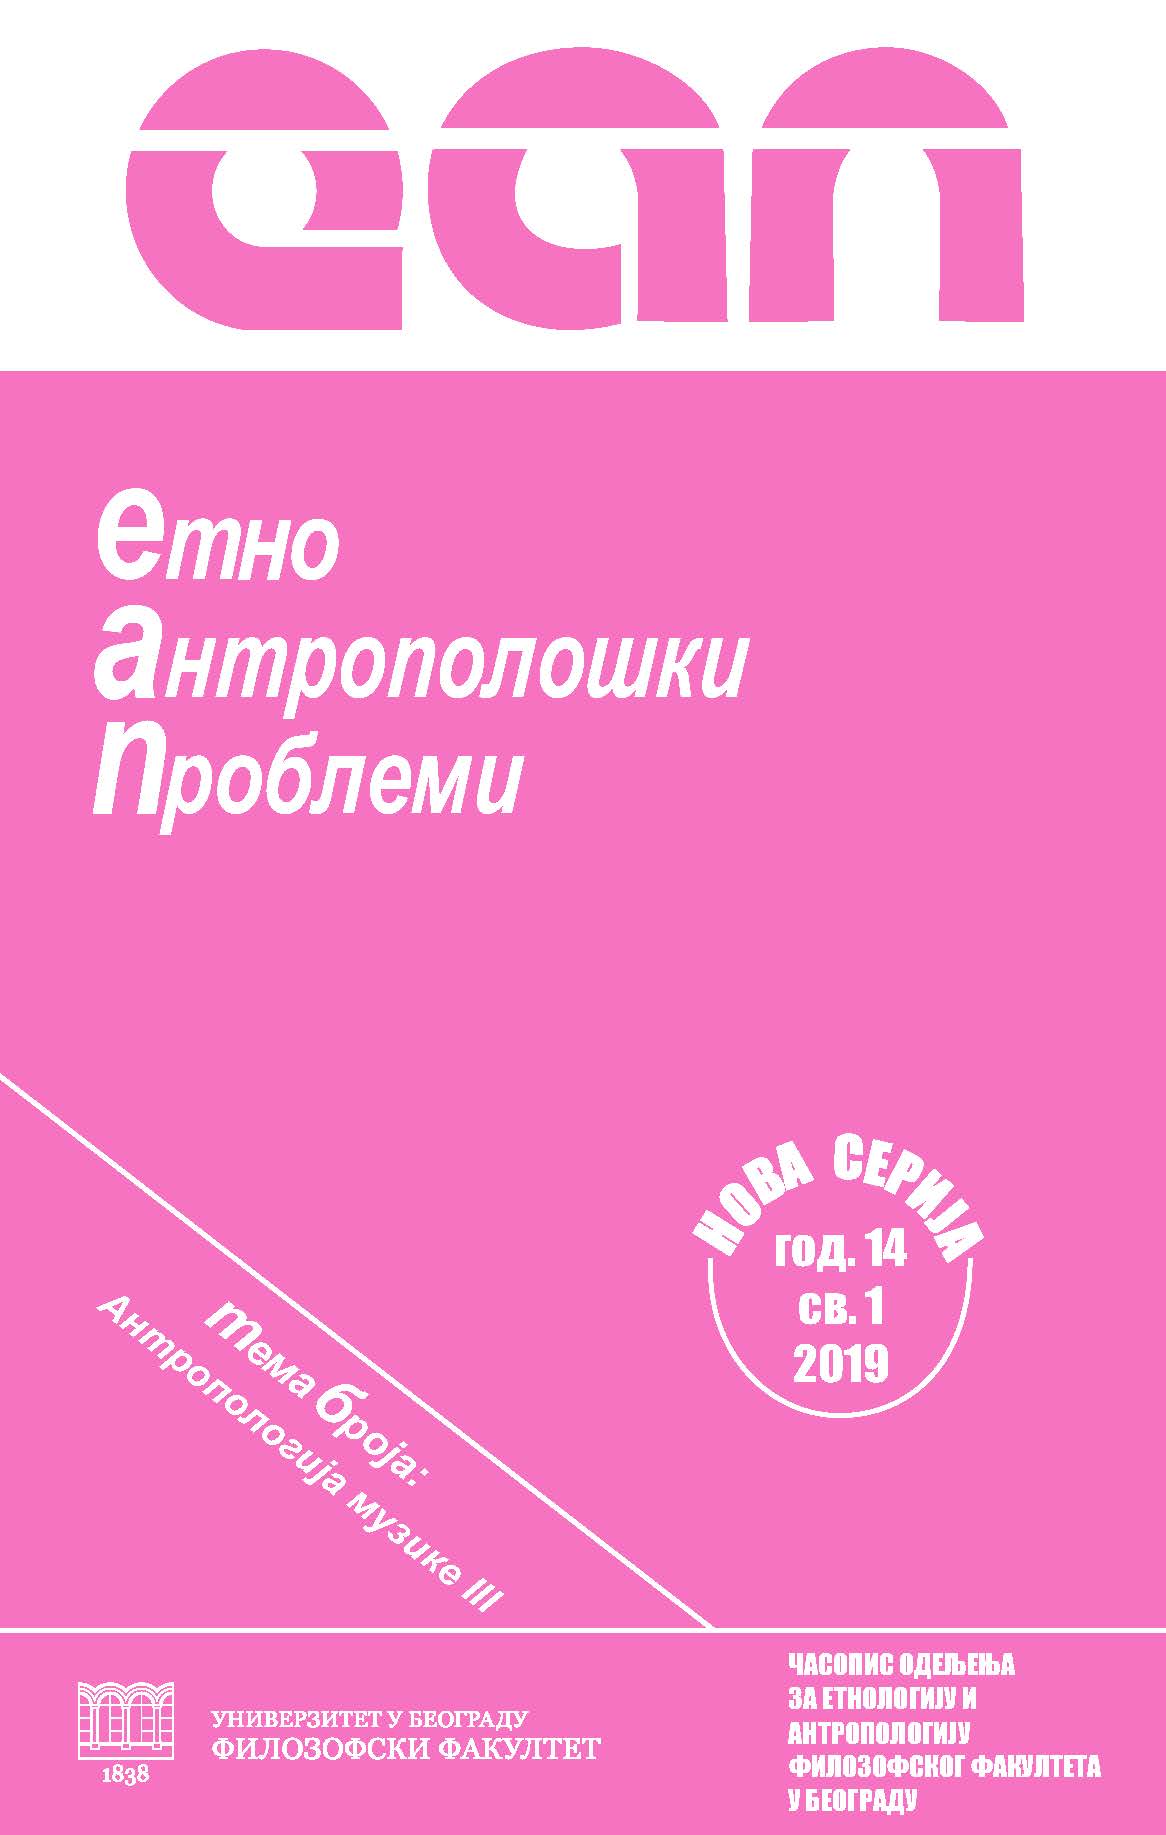 Representing the Yugoslav New Wave in the Documentary Film “The New Wave in Socialist Federal Republic of Yugoslavia as a Social Movement” Cover Image